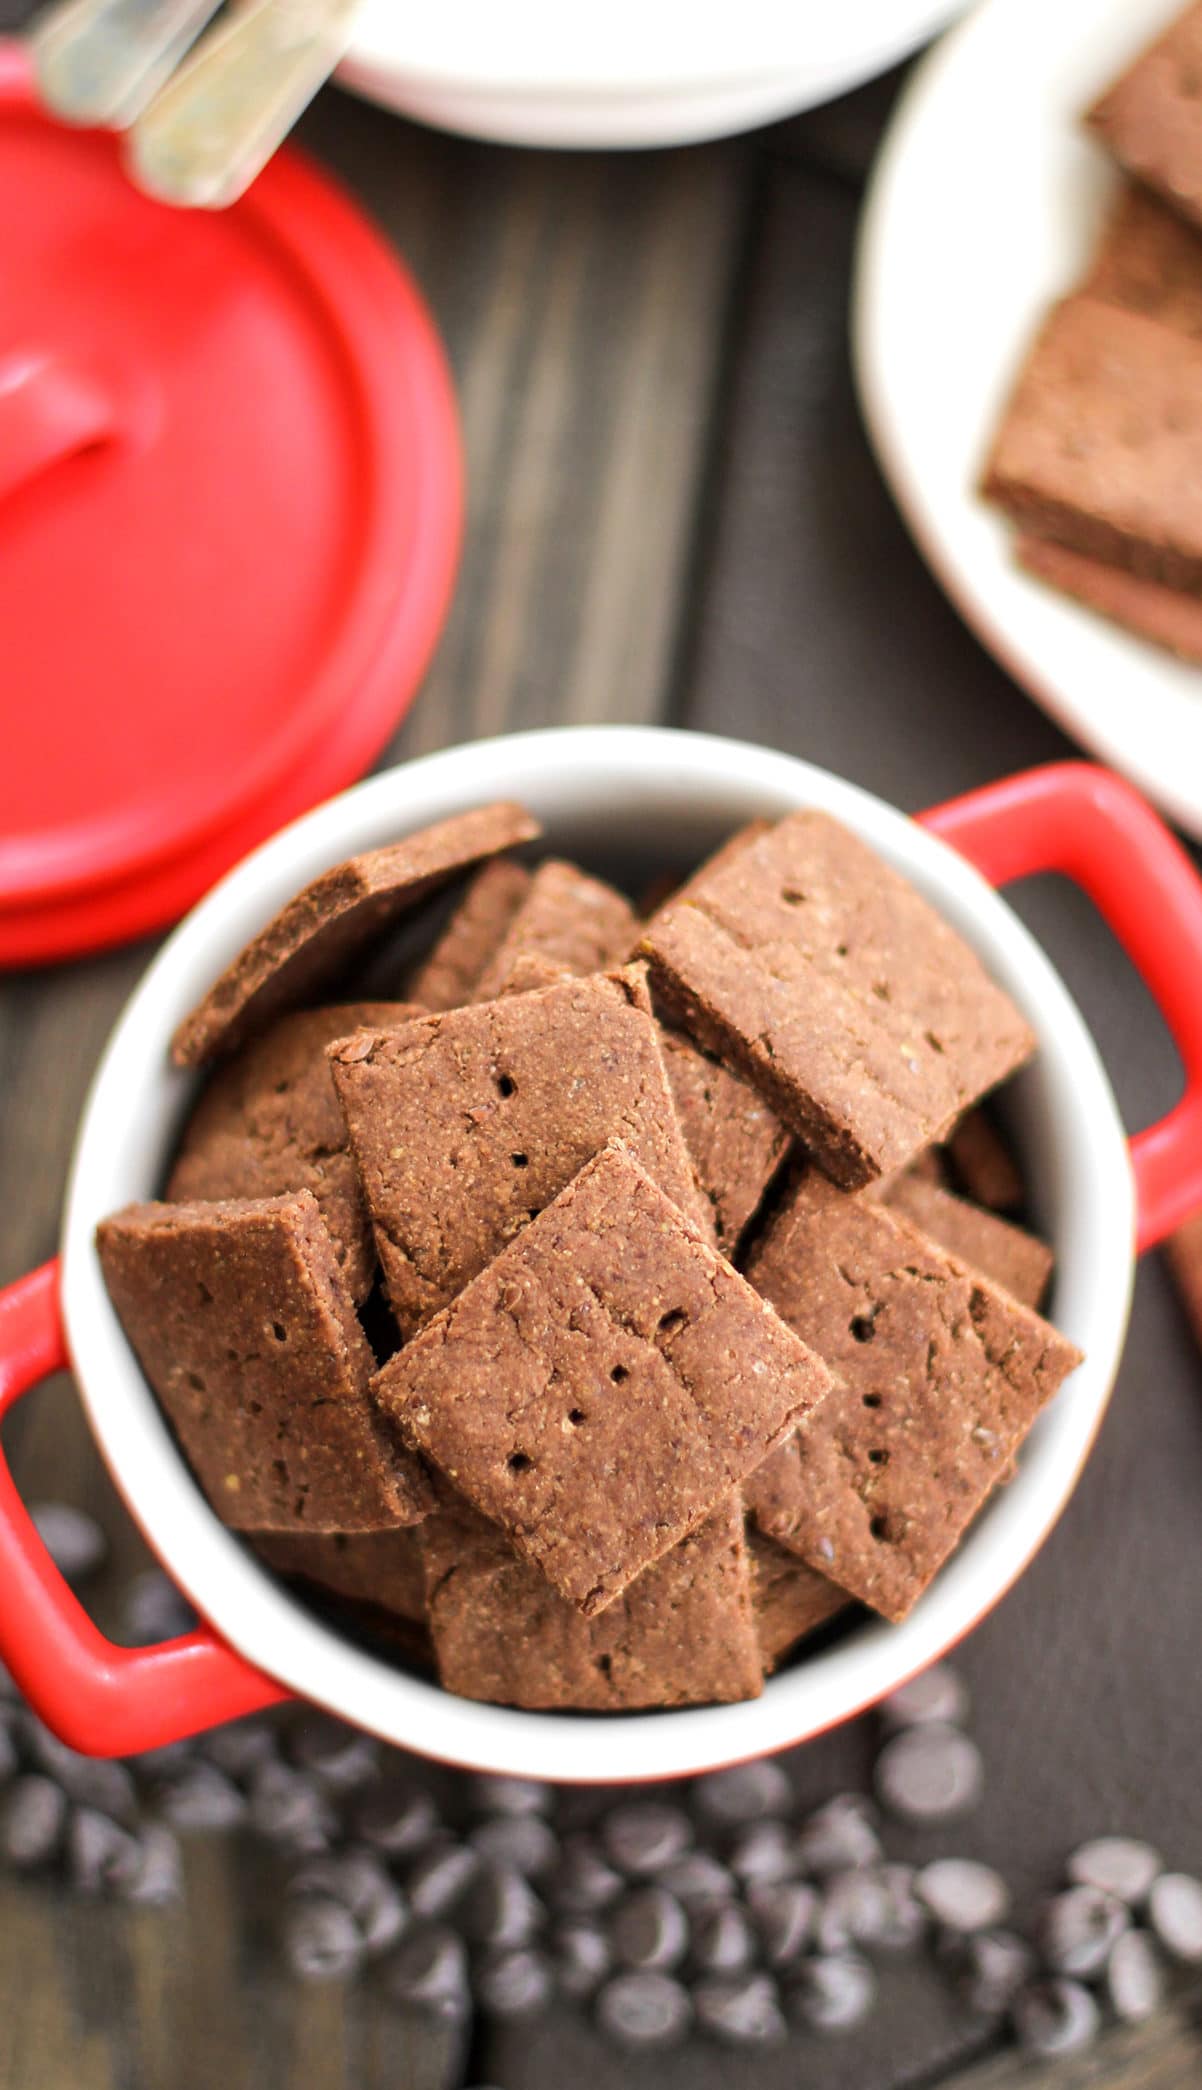 Healthy Chocolate Flax Crackers (refined sugar free, low fat, high protein, high fiber, gluten free, vegan) - Healthy Dessert Recipes at Desserts with Benefits